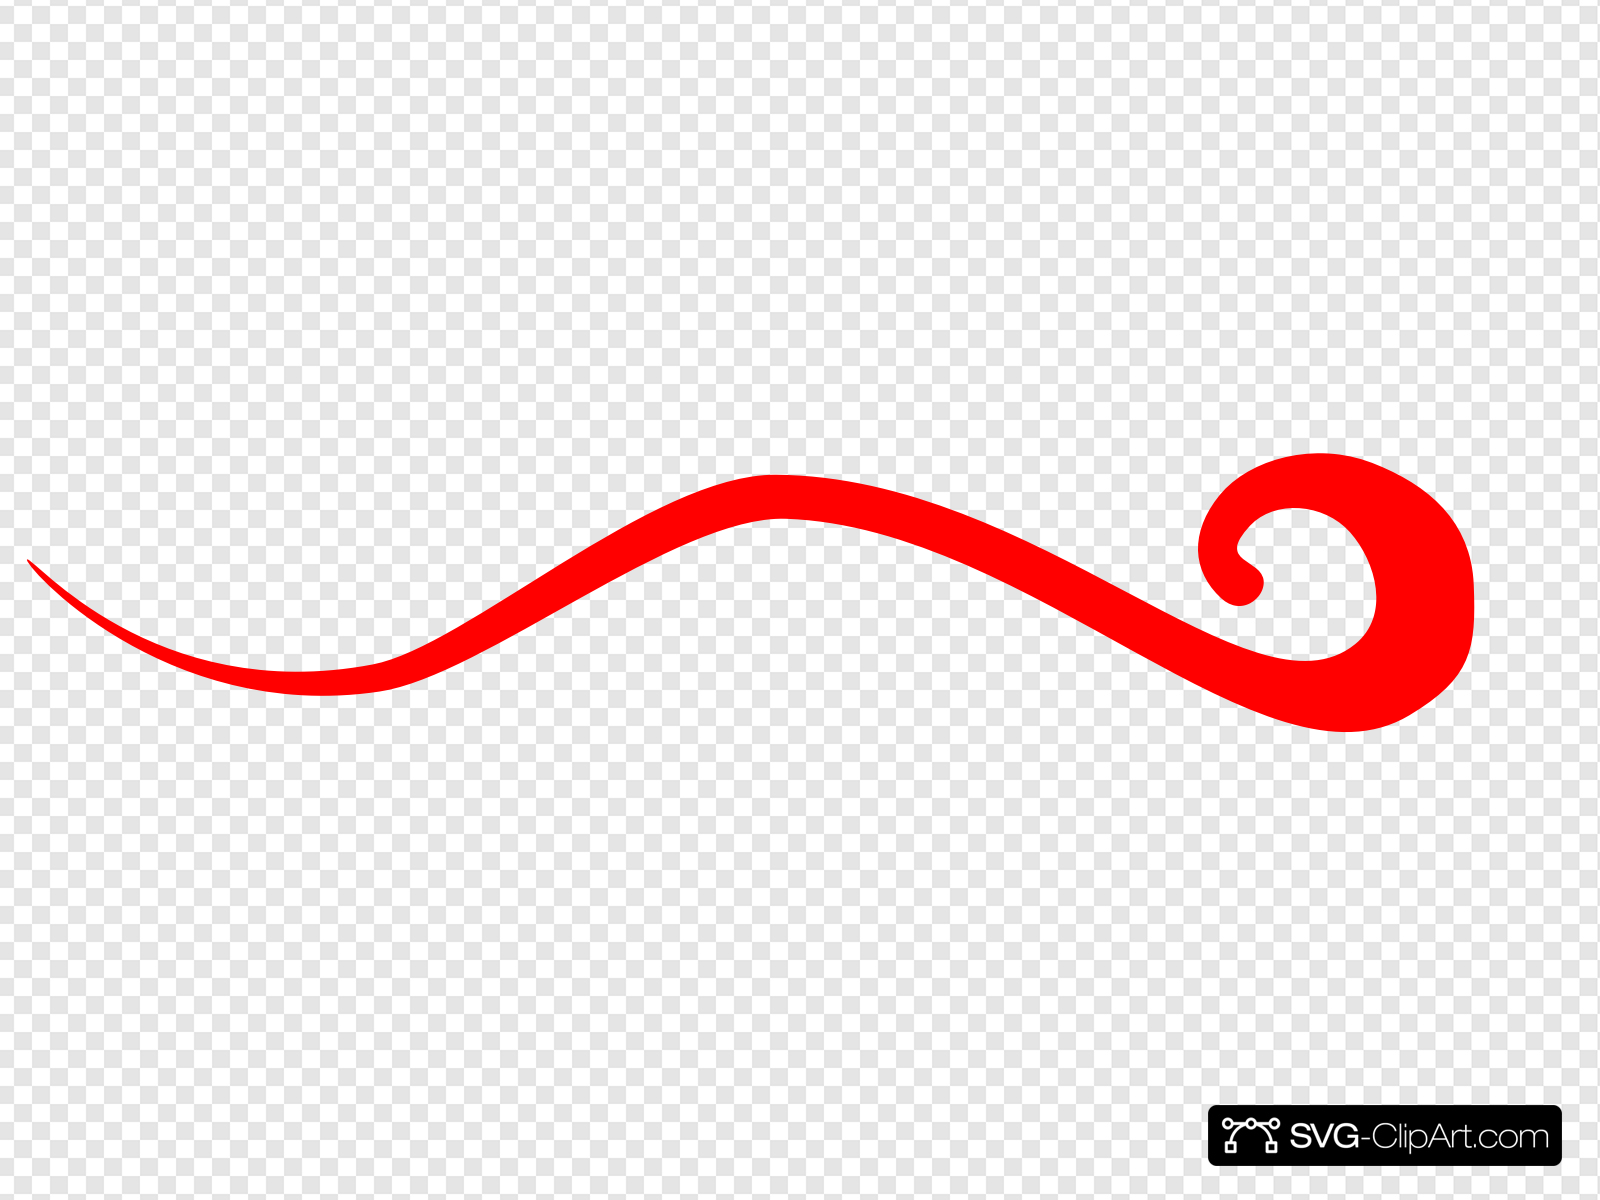 Red Swoosh Line Clip art, Icon and SVG.